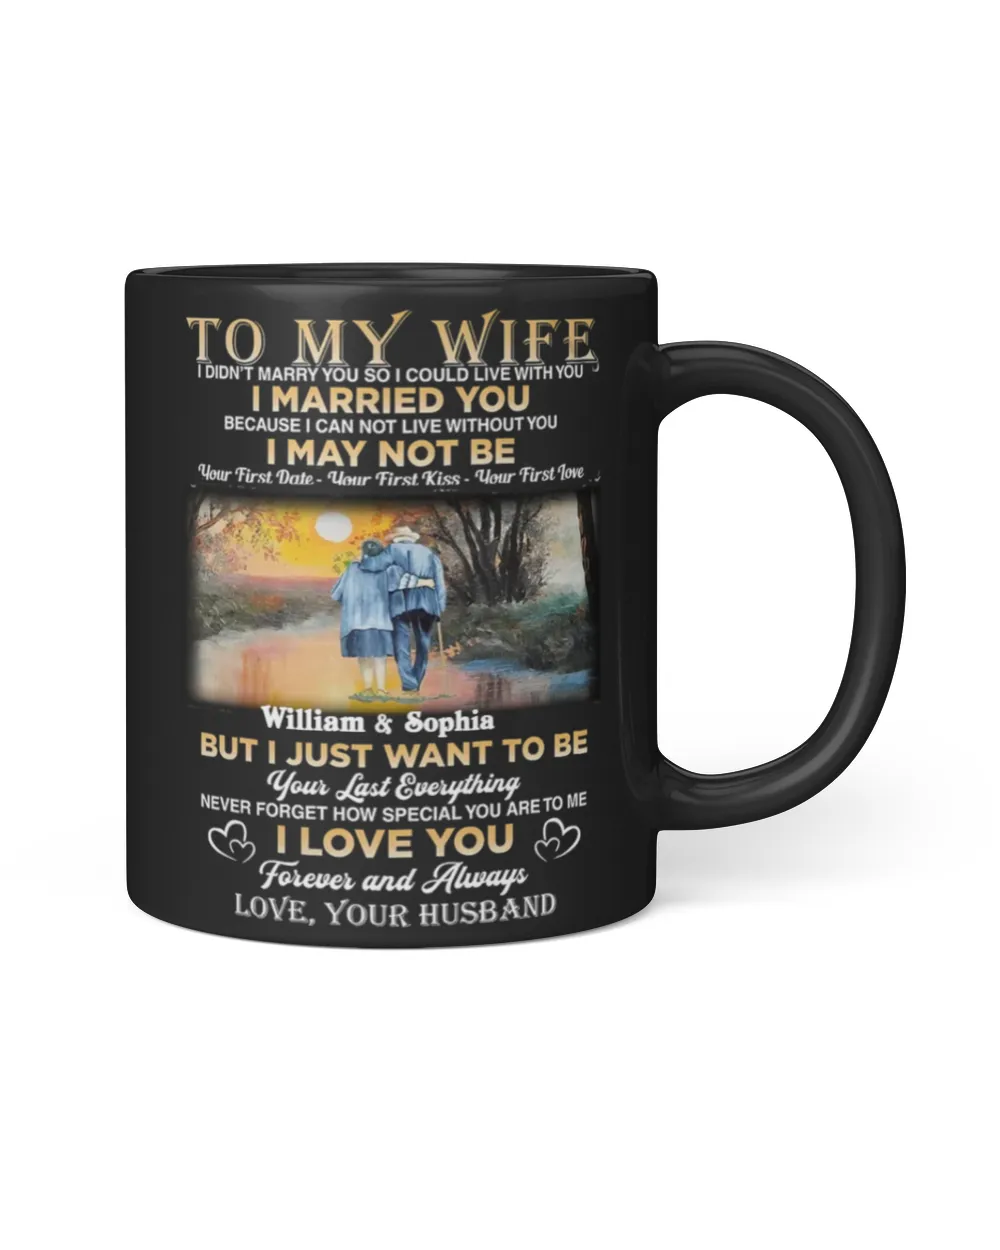 To My Wife I didn't marry you so i could i live with you| Personalized Gift for Wife